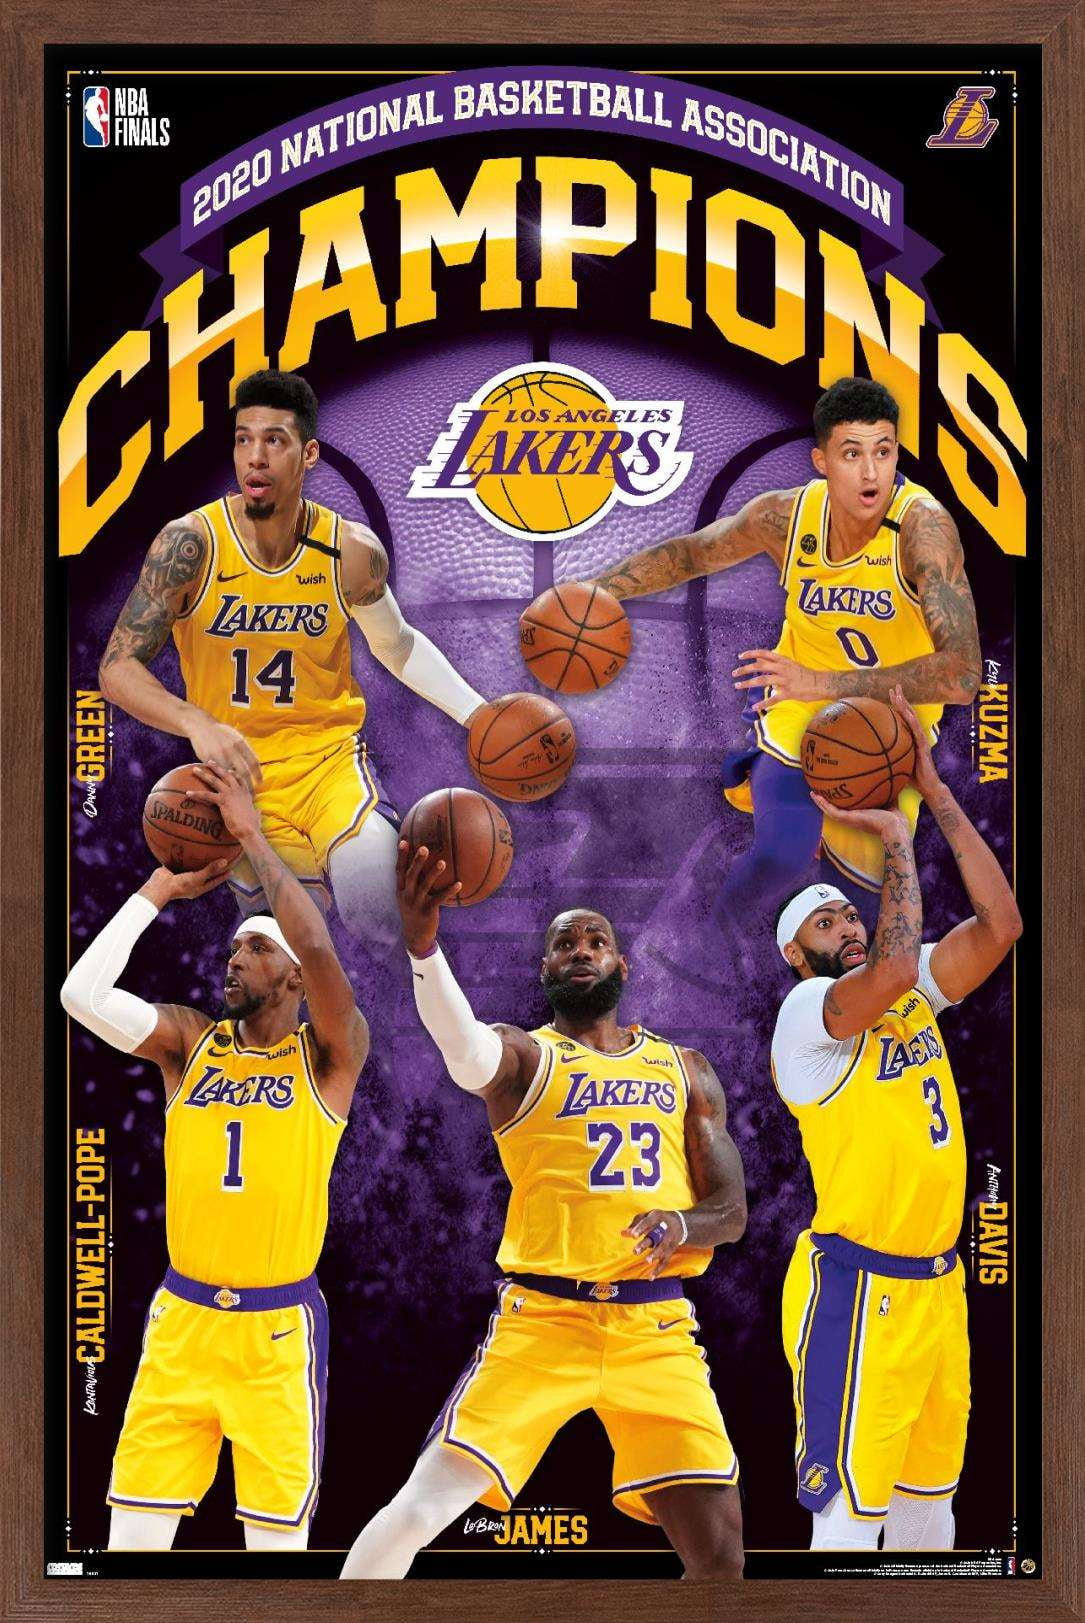 los angeles lakers roster 2021 to 2022